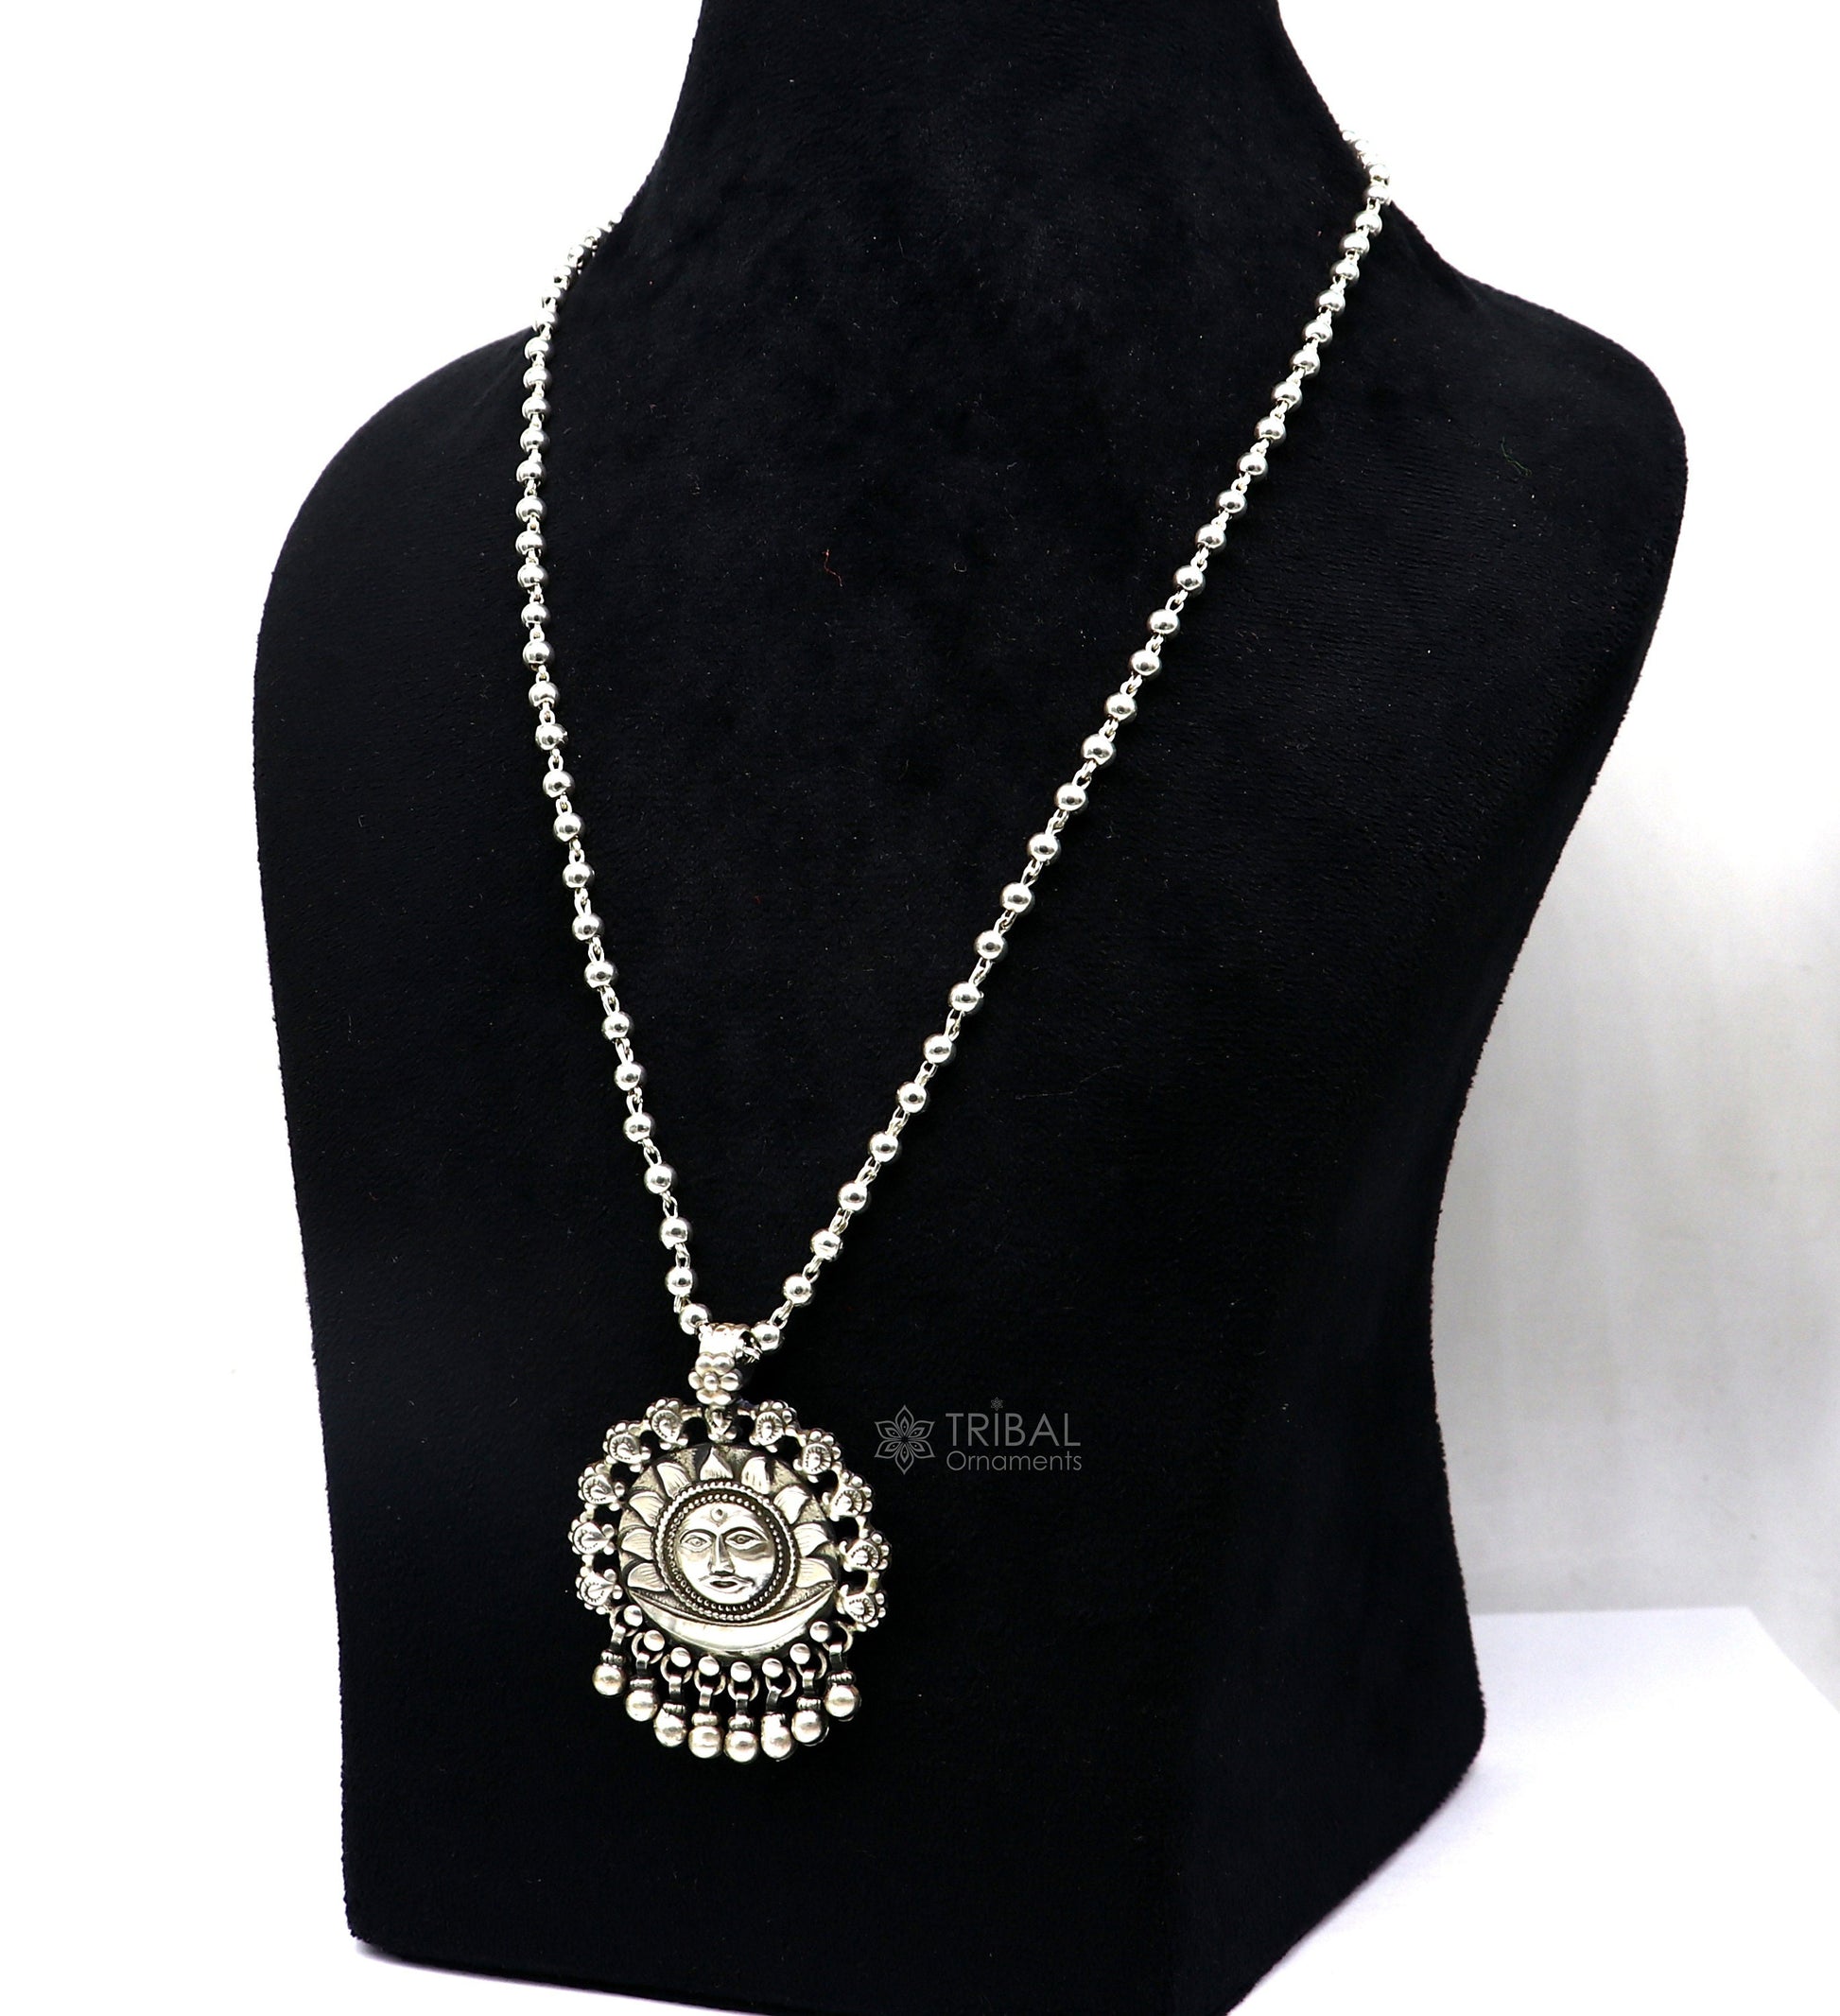 30" 4 mm Beaded chain with amazing sun face pendant 925 sterling silver handmade charm necklace with fabulous hanging drops jewelry set628 - TRIBAL ORNAMENTS